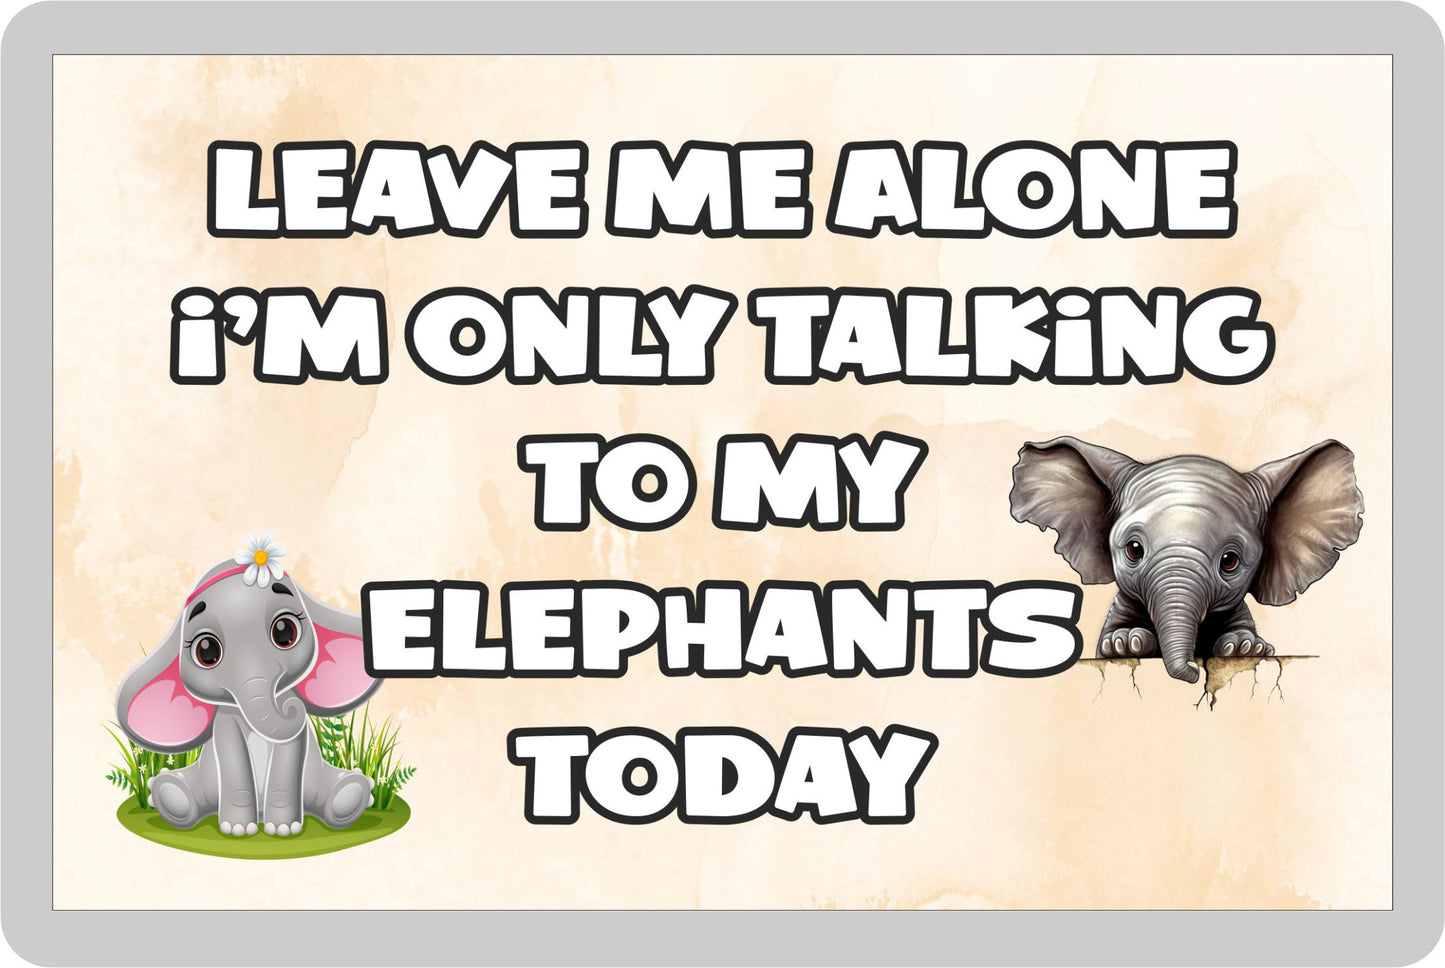 Elephant Fridge Magnet Gift - Leave Me Alone I'm Only Talking To My * Today - Novelty Cute Bird Animal Present